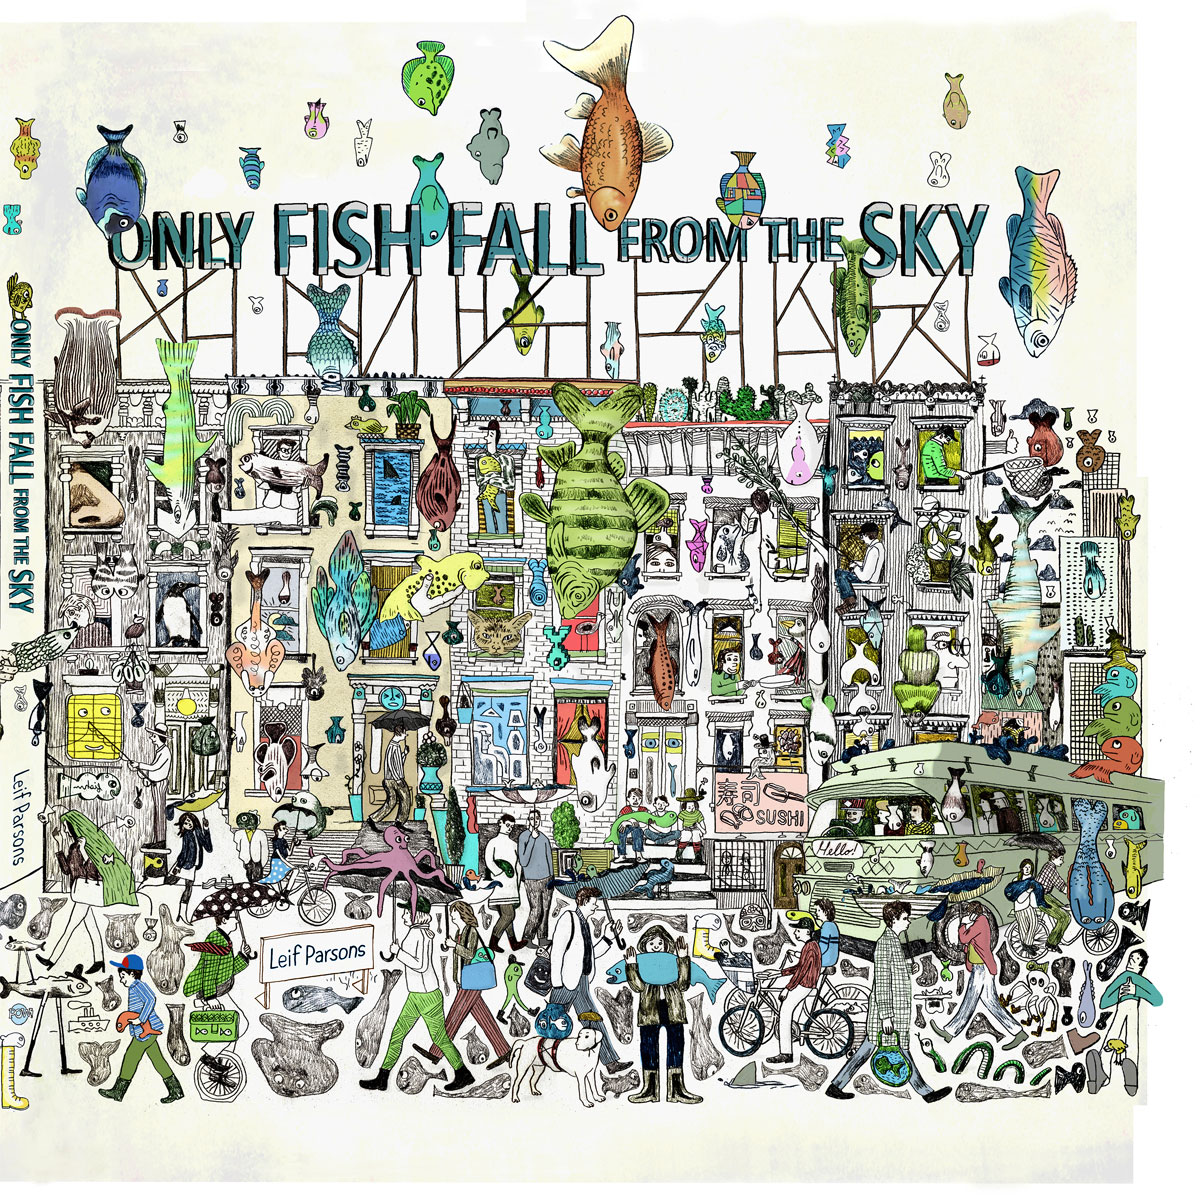 Cover for “Only Fish Fall from the Sky” by Leif Parsons